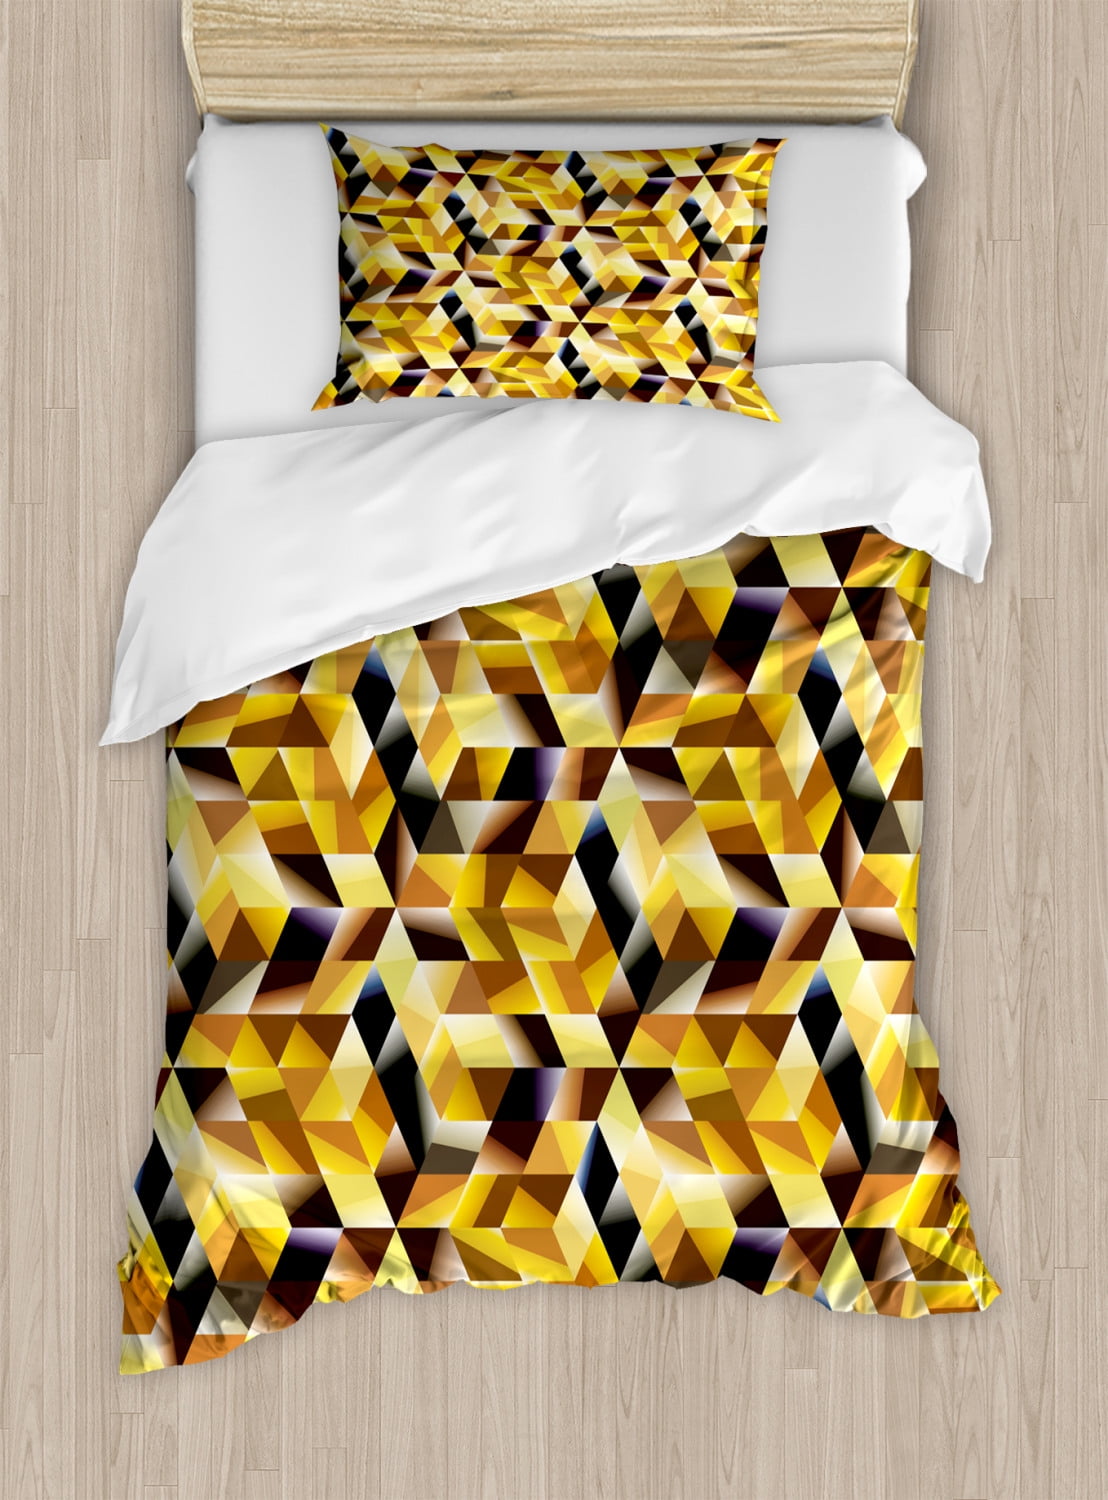 Gold Twin Size Duvet Cover Set Cubes And Blocks Form Abstract Art Geometric Digital Graphic Art Pattern Decorative 2 Piece Bedding Set With 1 Pillow Sham Gold Copper And Black By Ambesonne